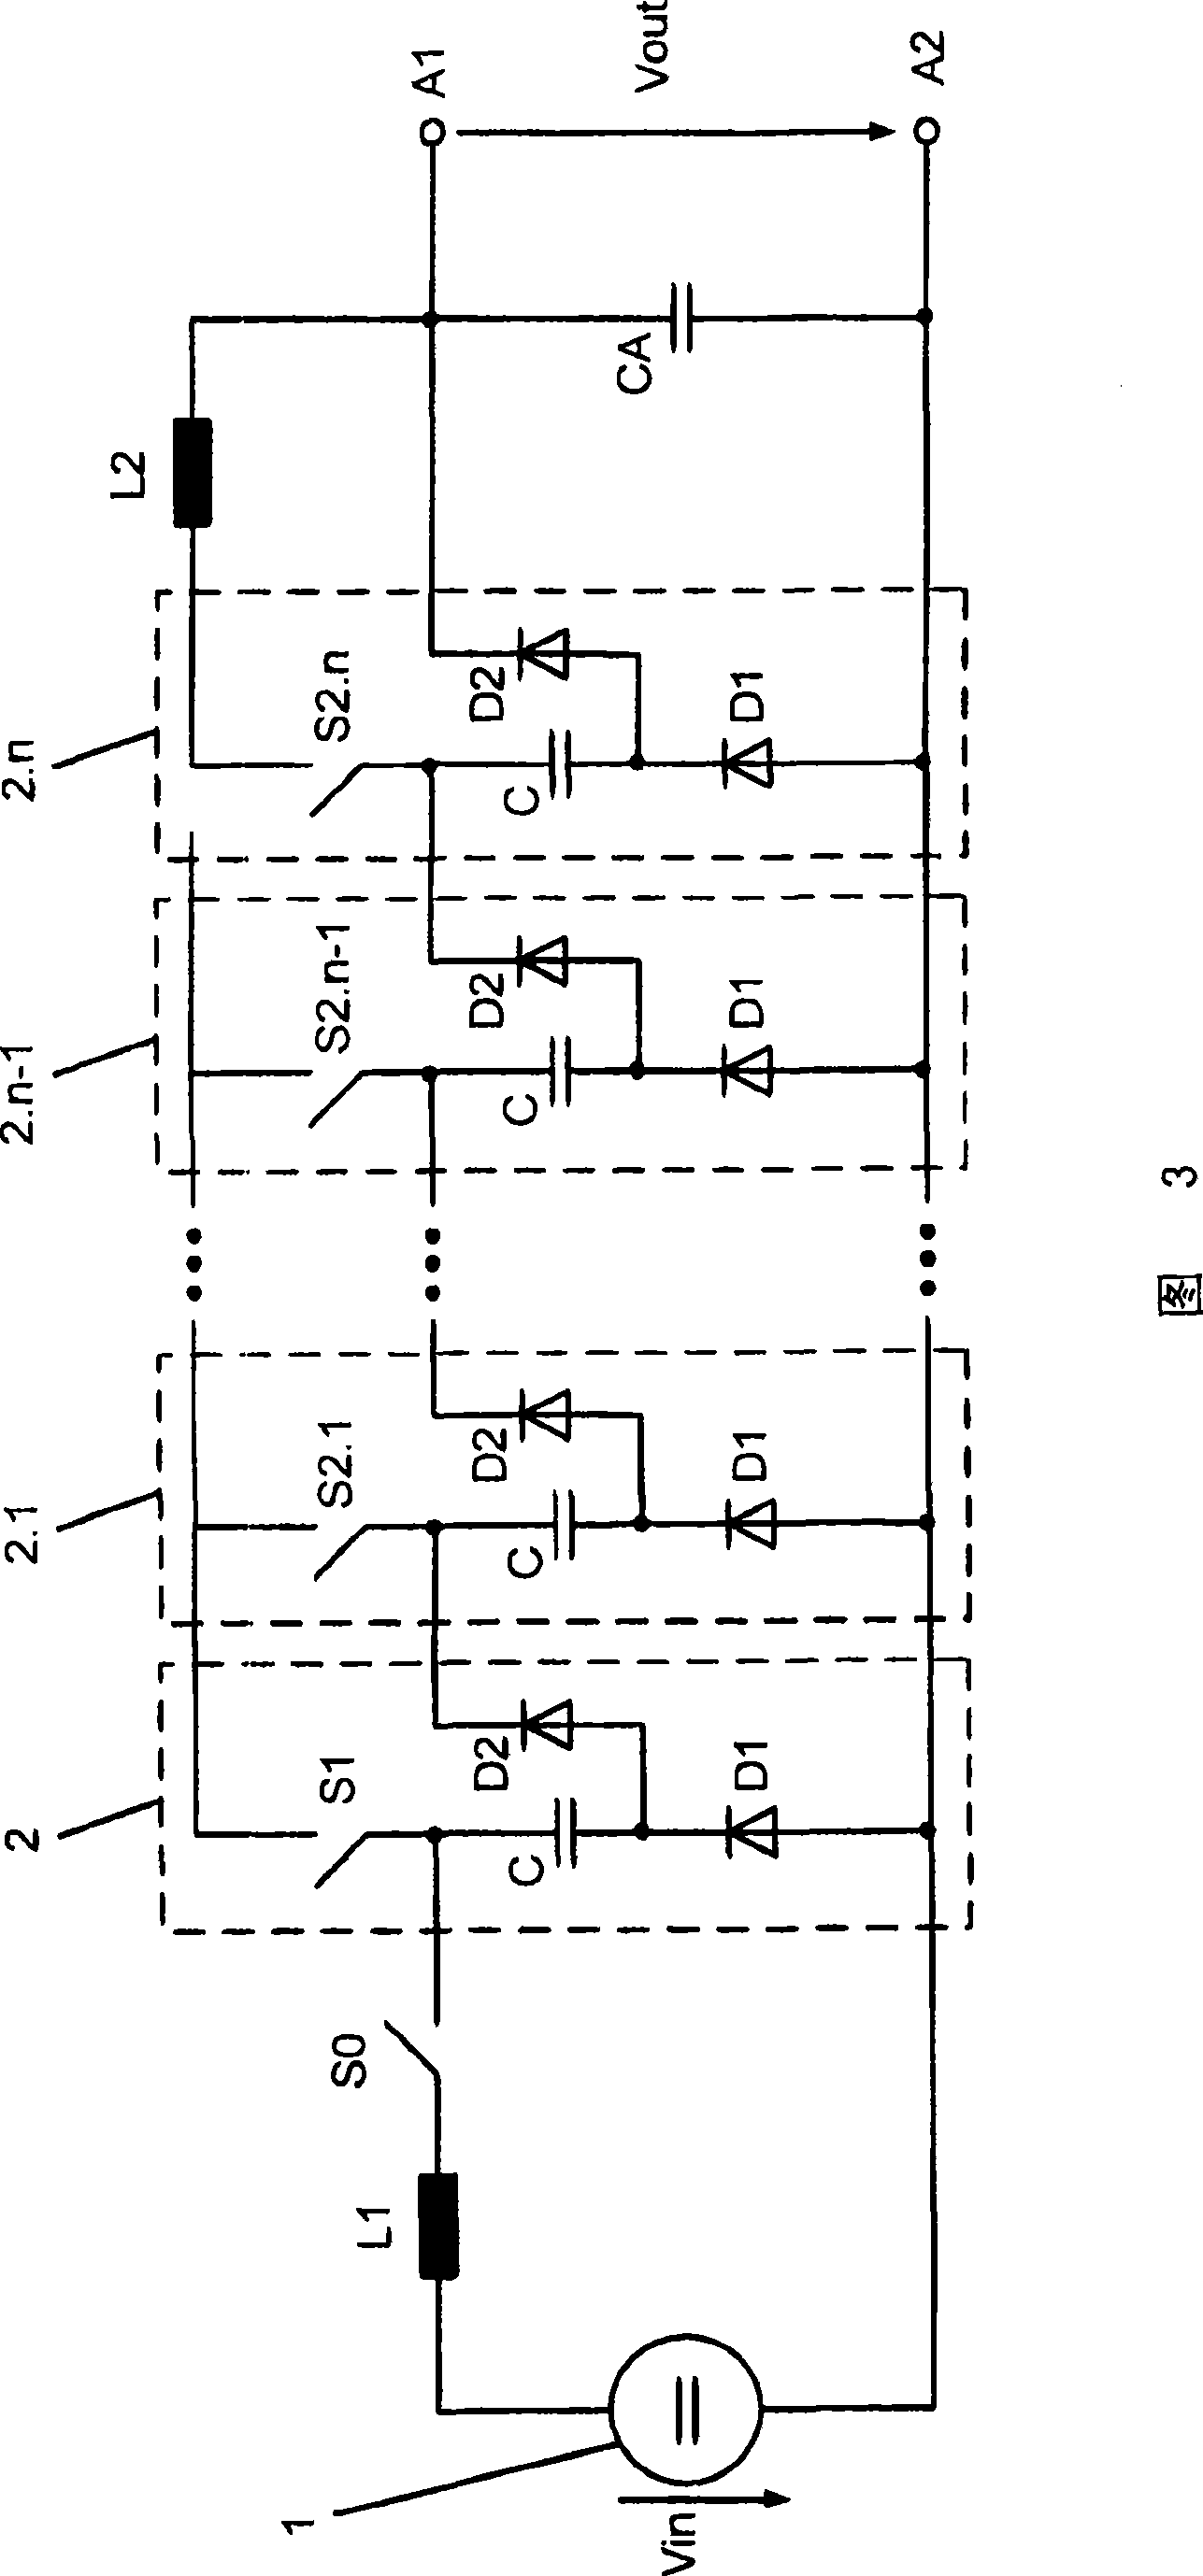 Converter circuit and method for operating such a converter circuit